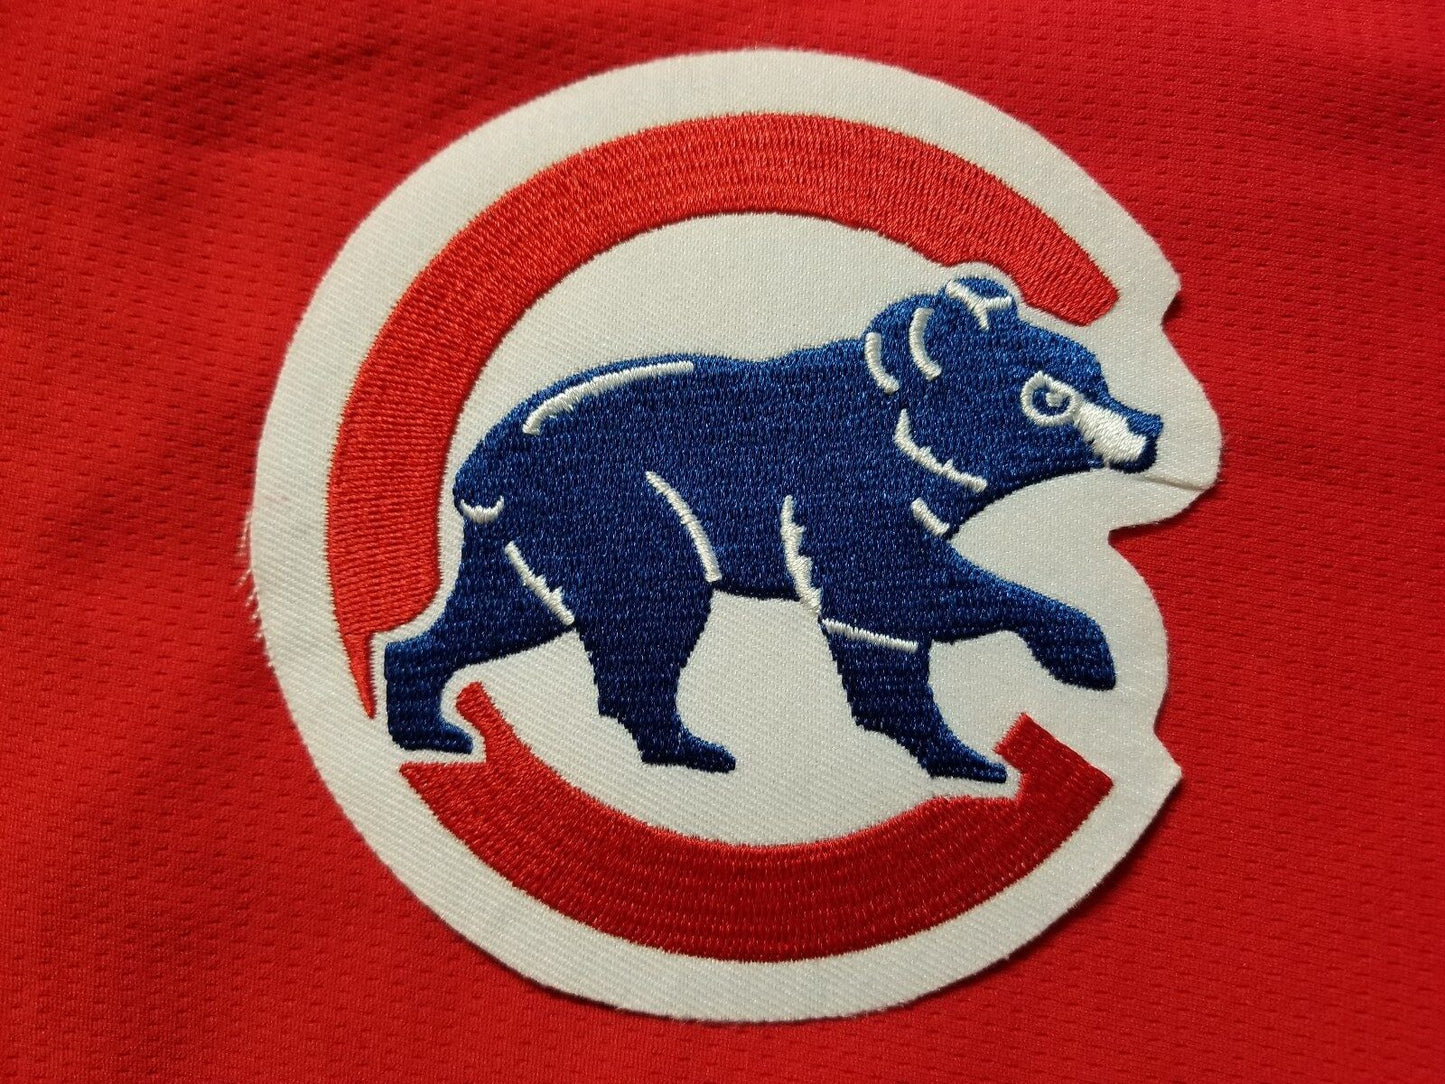 Chicago Cubs Baseball Team Patch